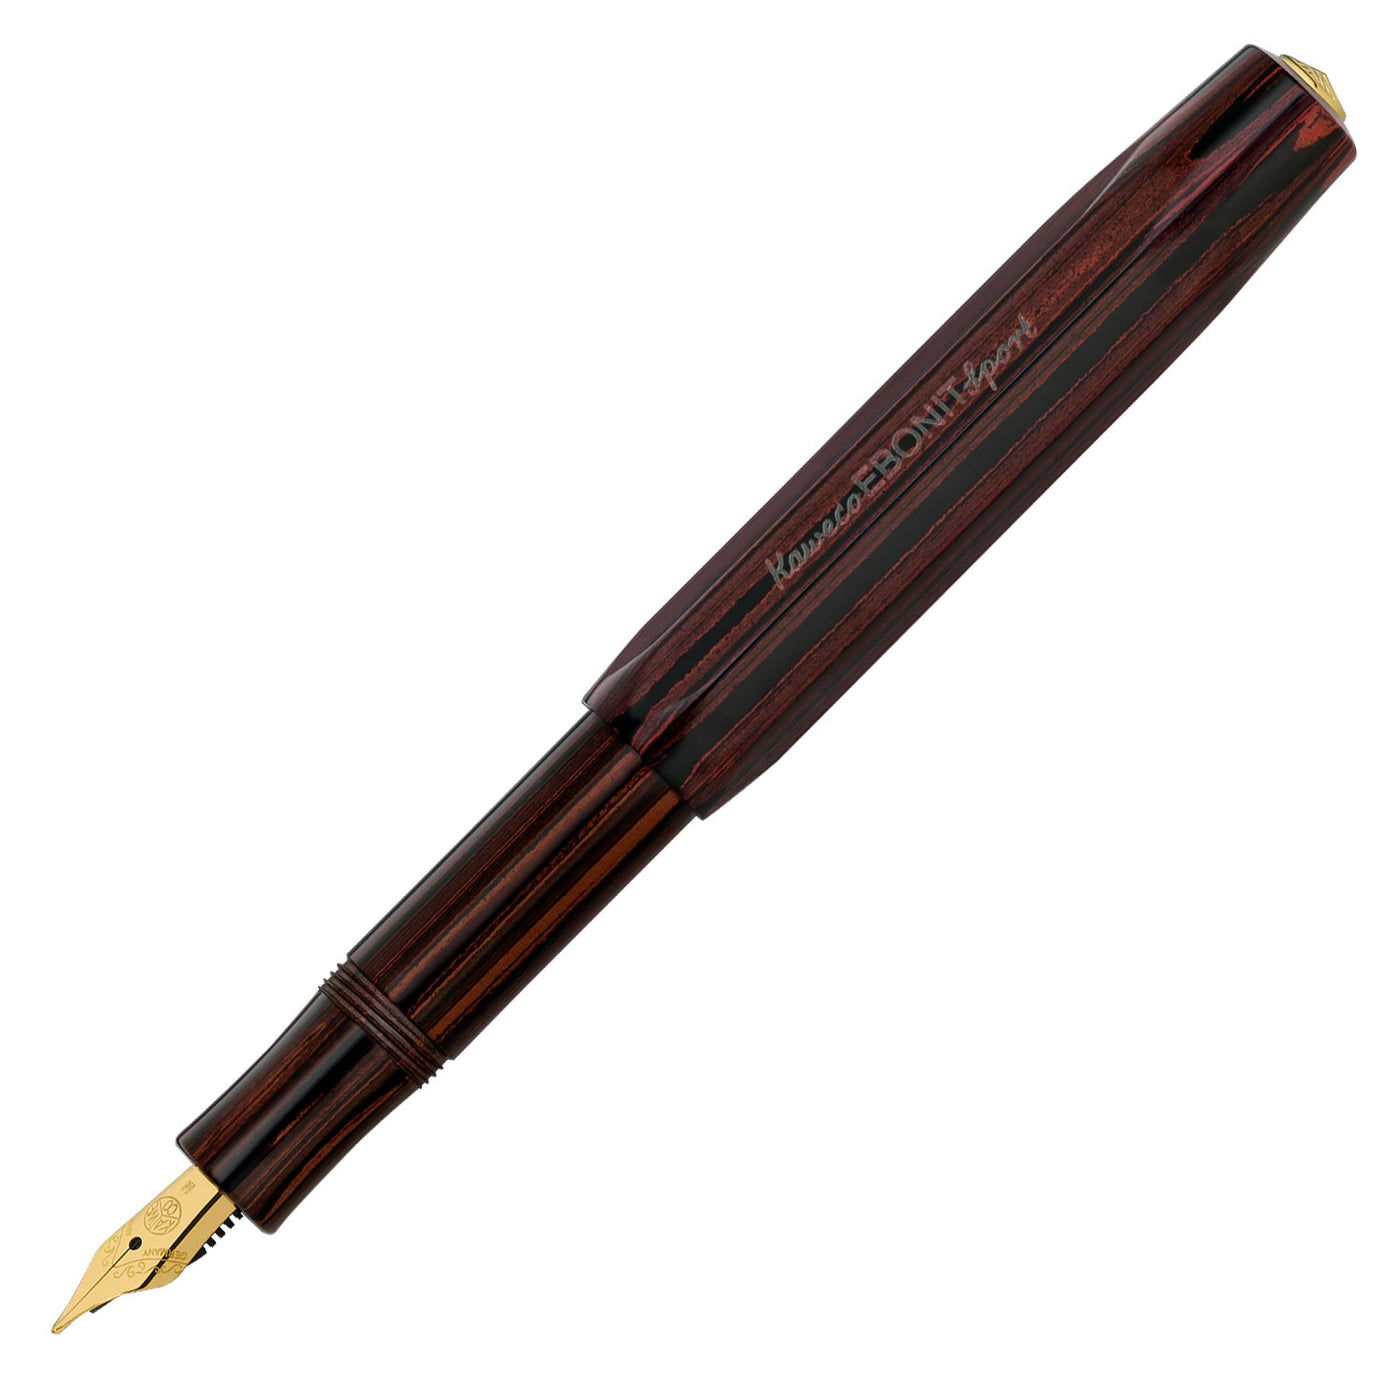 Kaweco Ebonit Sport 140 Years Anniversary Fountain Pen - Brown (Special Edition)